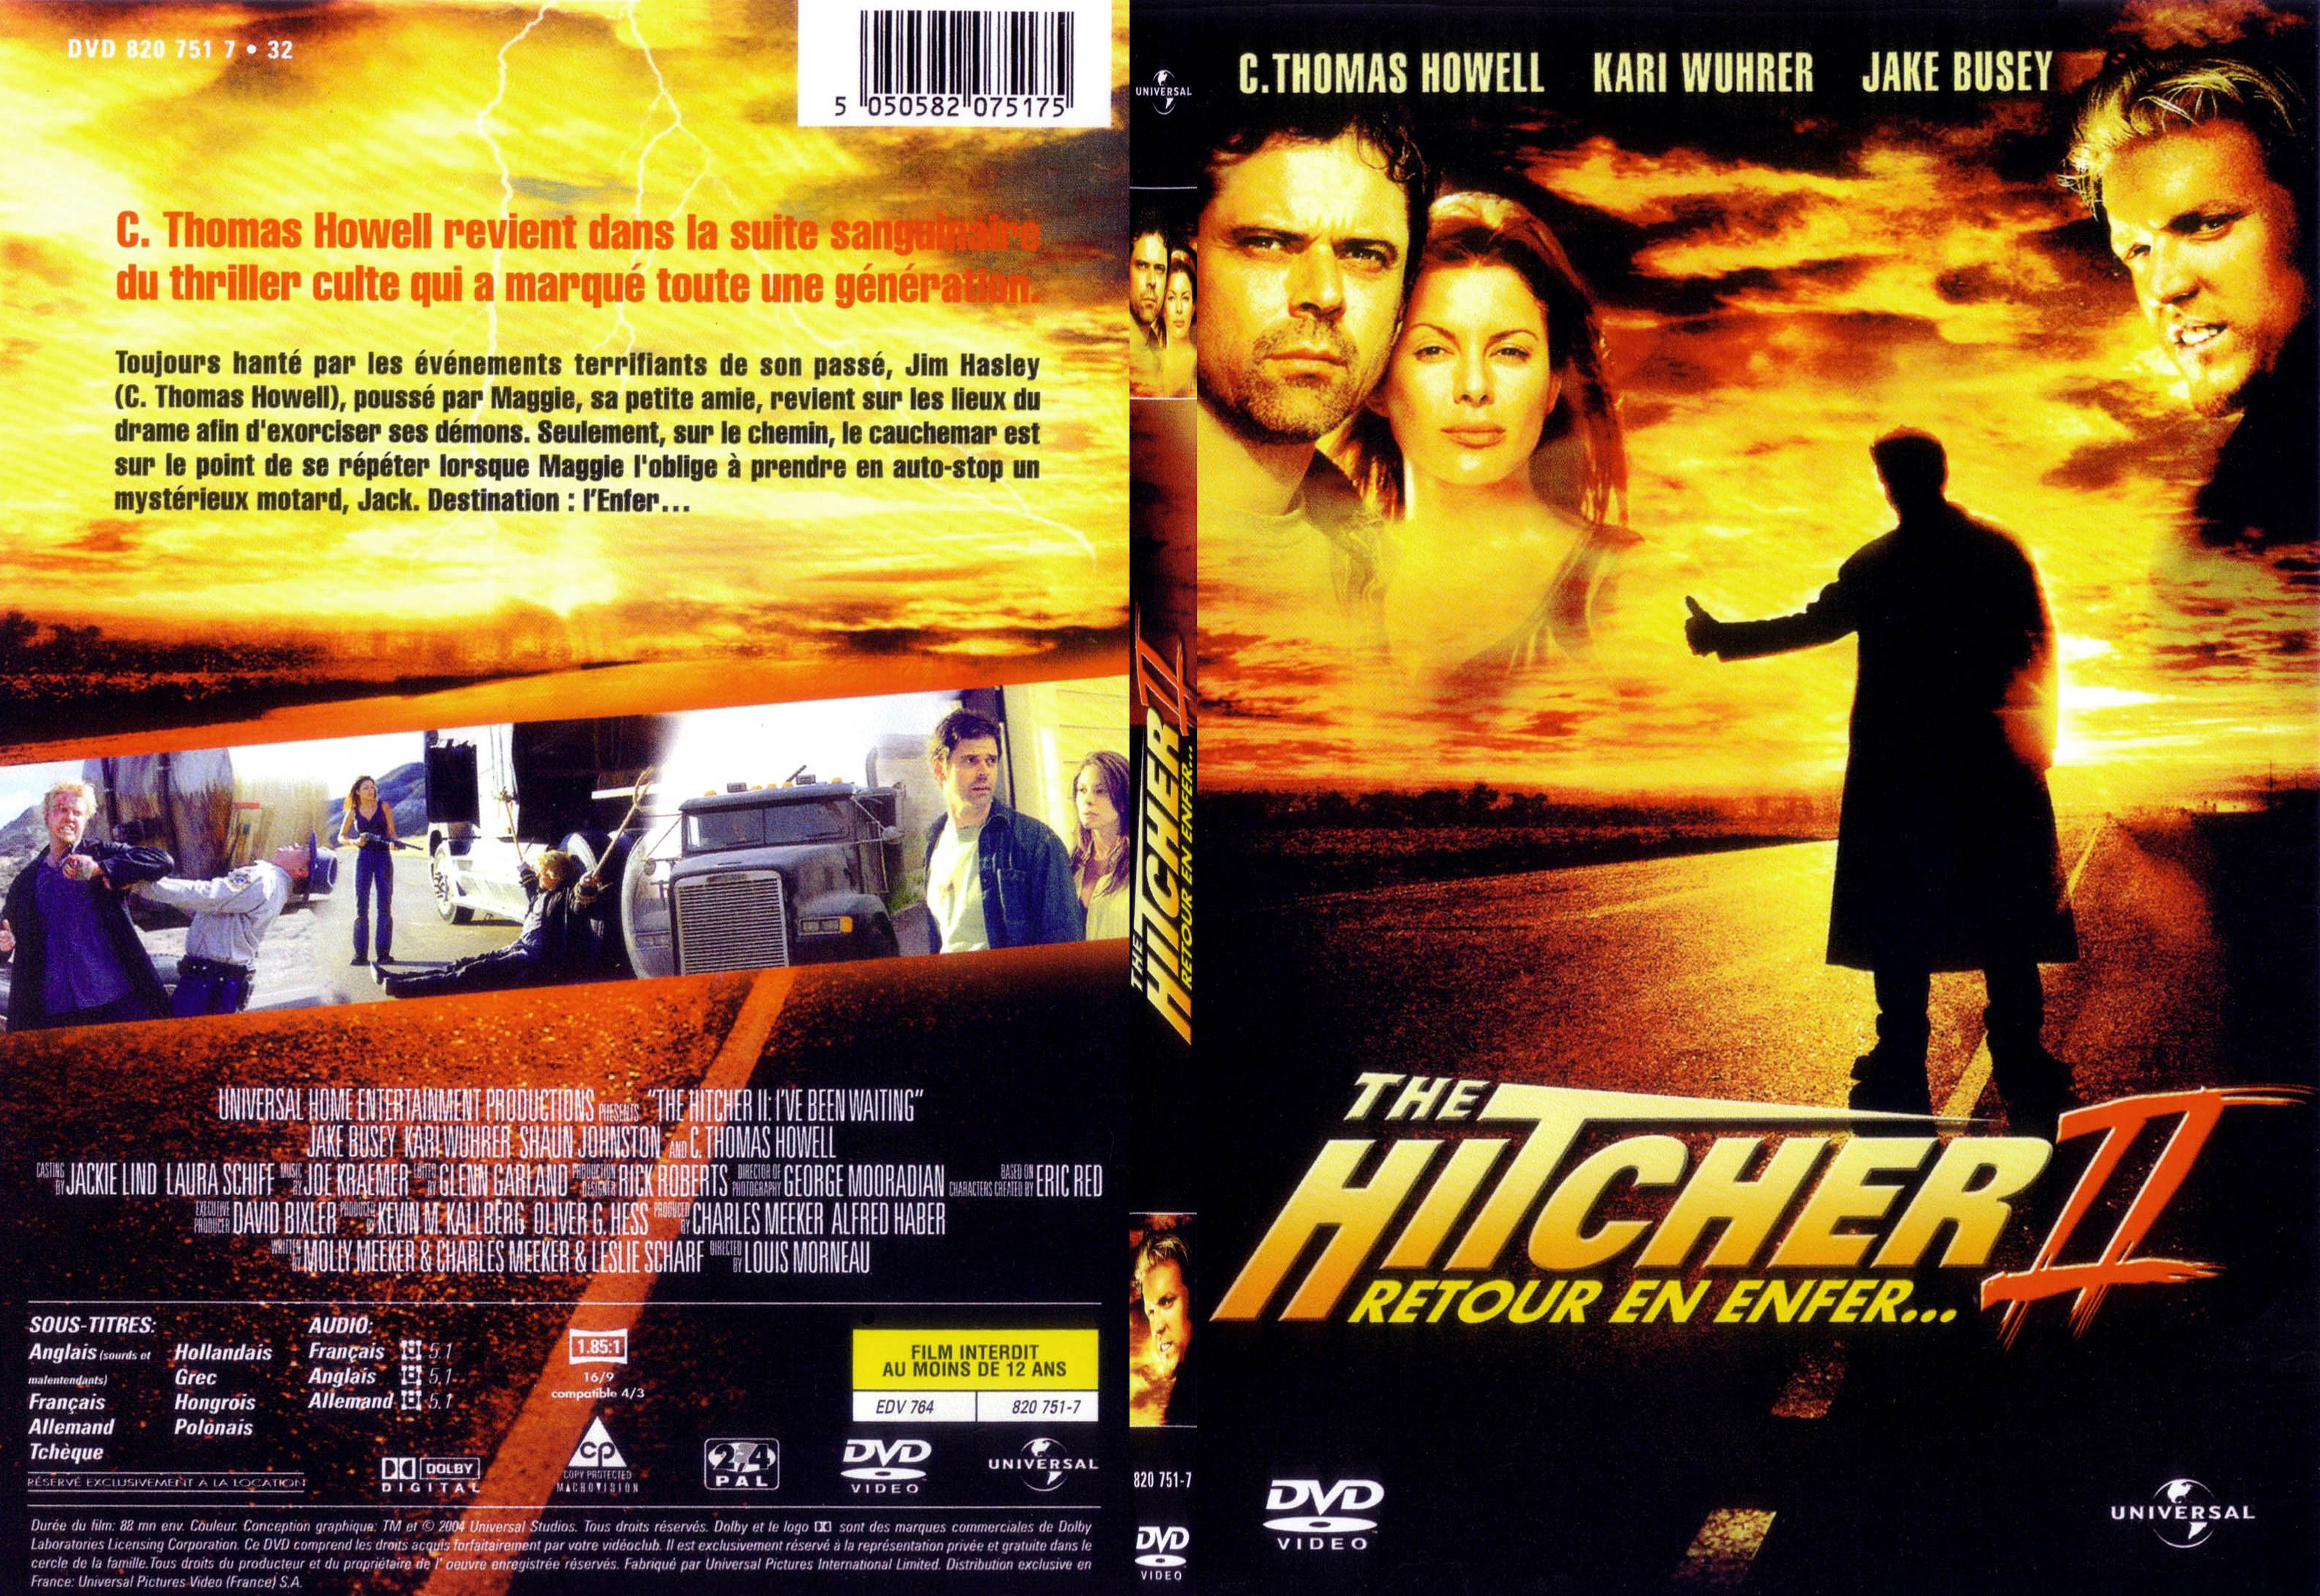 Jaquette DVD The hitcher 2 - SLIM